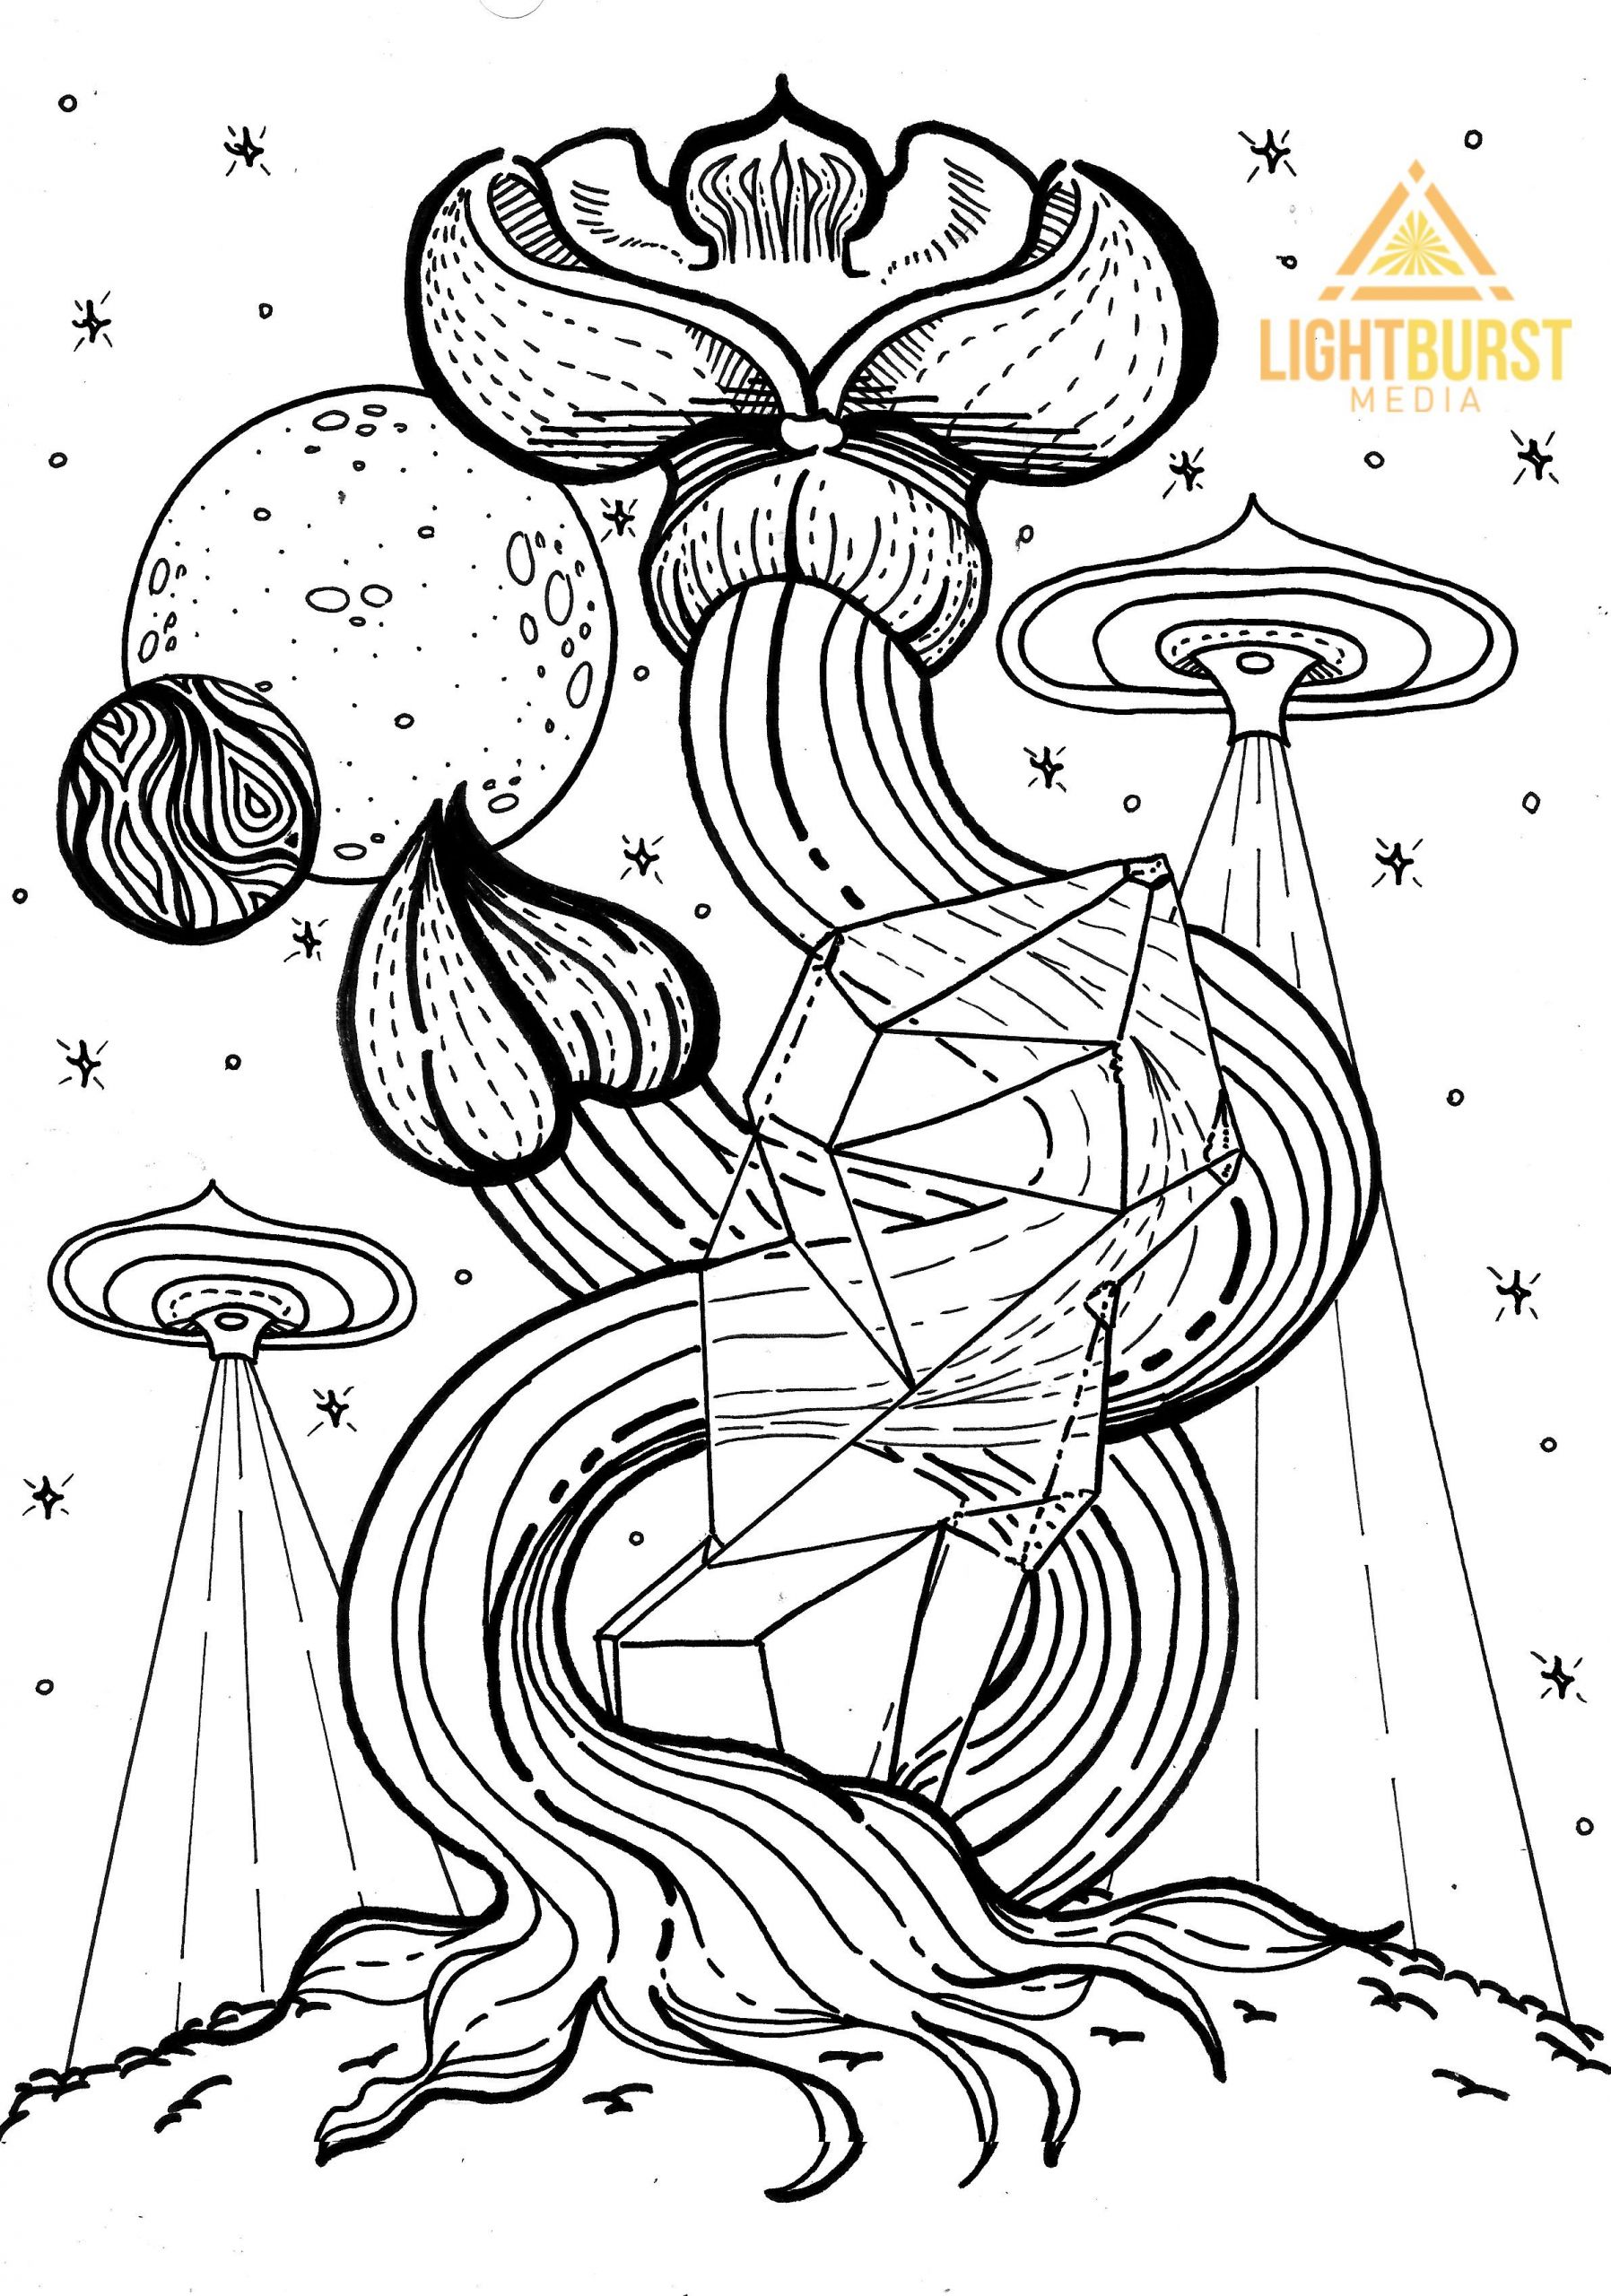 Printable Free Coloring Pages For Adults
 Free Coloring Page from Space Dreams Sci Fi Adult